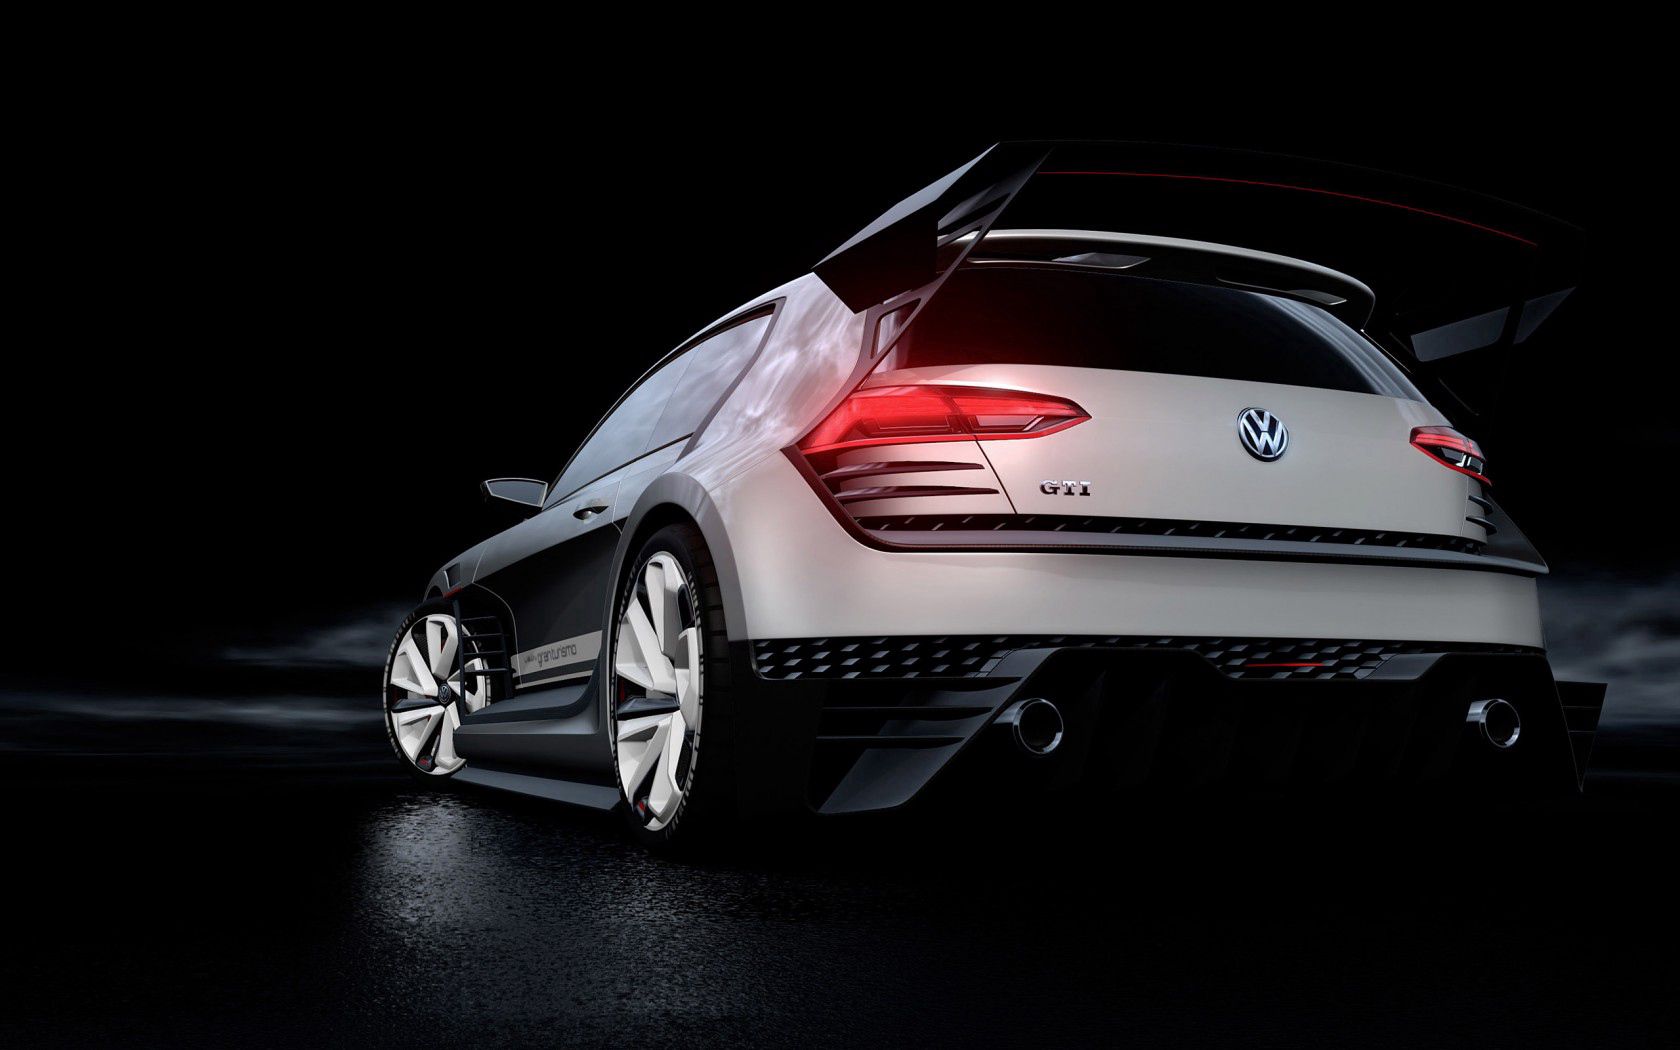 back view, volkswagen, cars, concept, rear view, style, gti 1080p